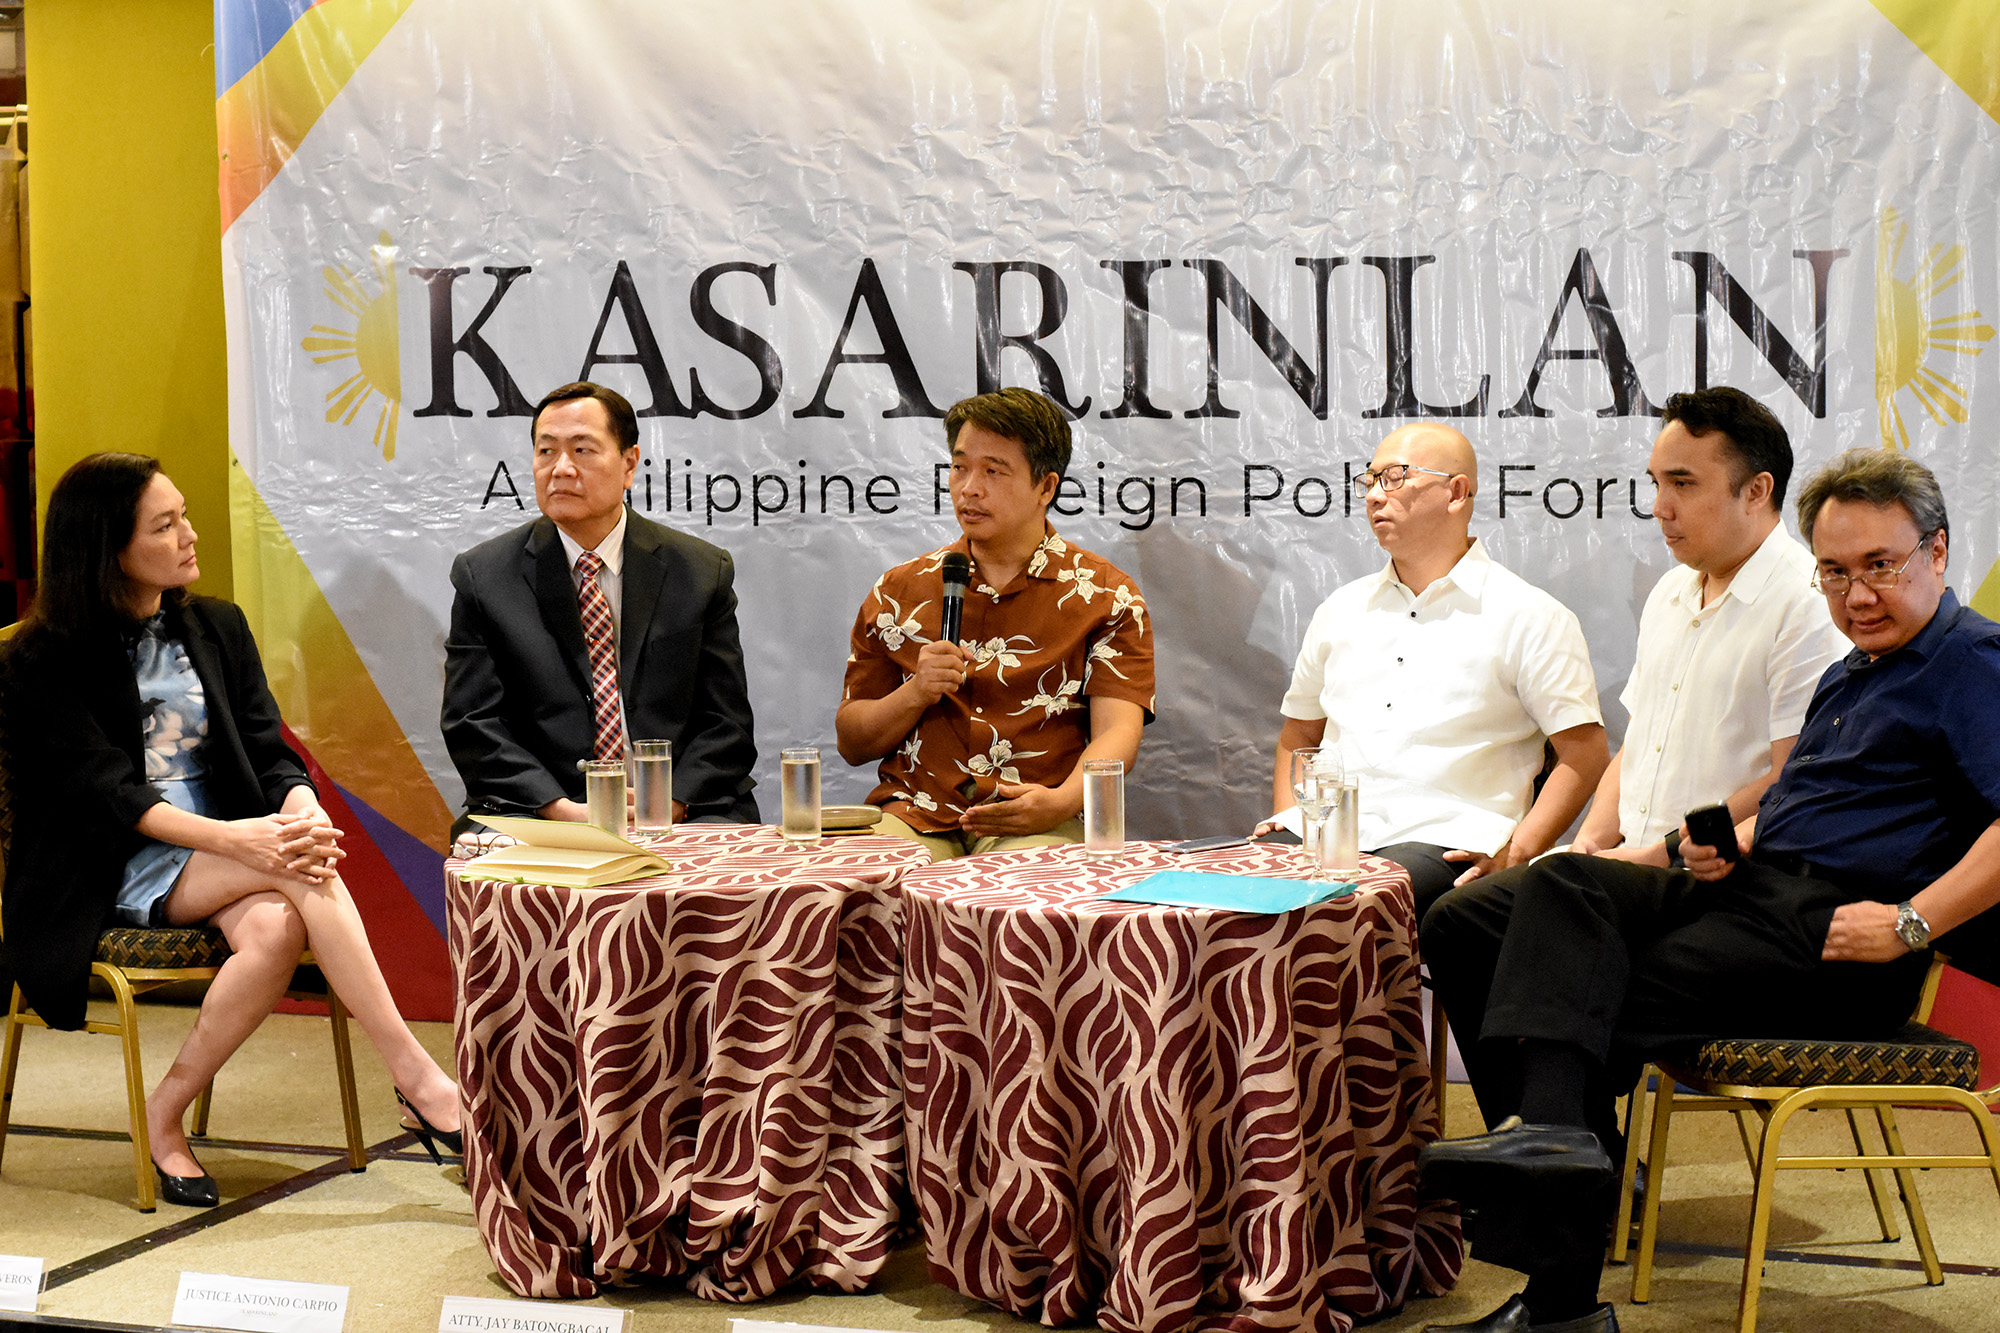 'KASARINLAN' FORUM. Senator Risa Hontiveros, Acting Chief Justice Antonio Carpio, maritime law expert Jay Batongbacal, former solicitor general Florin Hilbay, former Akbayan party-list representative Barry Gutierrez, and military historian Jose Custodio (left to right) speak at the 'Kasarinlan' foreign policy forum on July 9, 2018. Photo by Angie de Silva/Rappler 